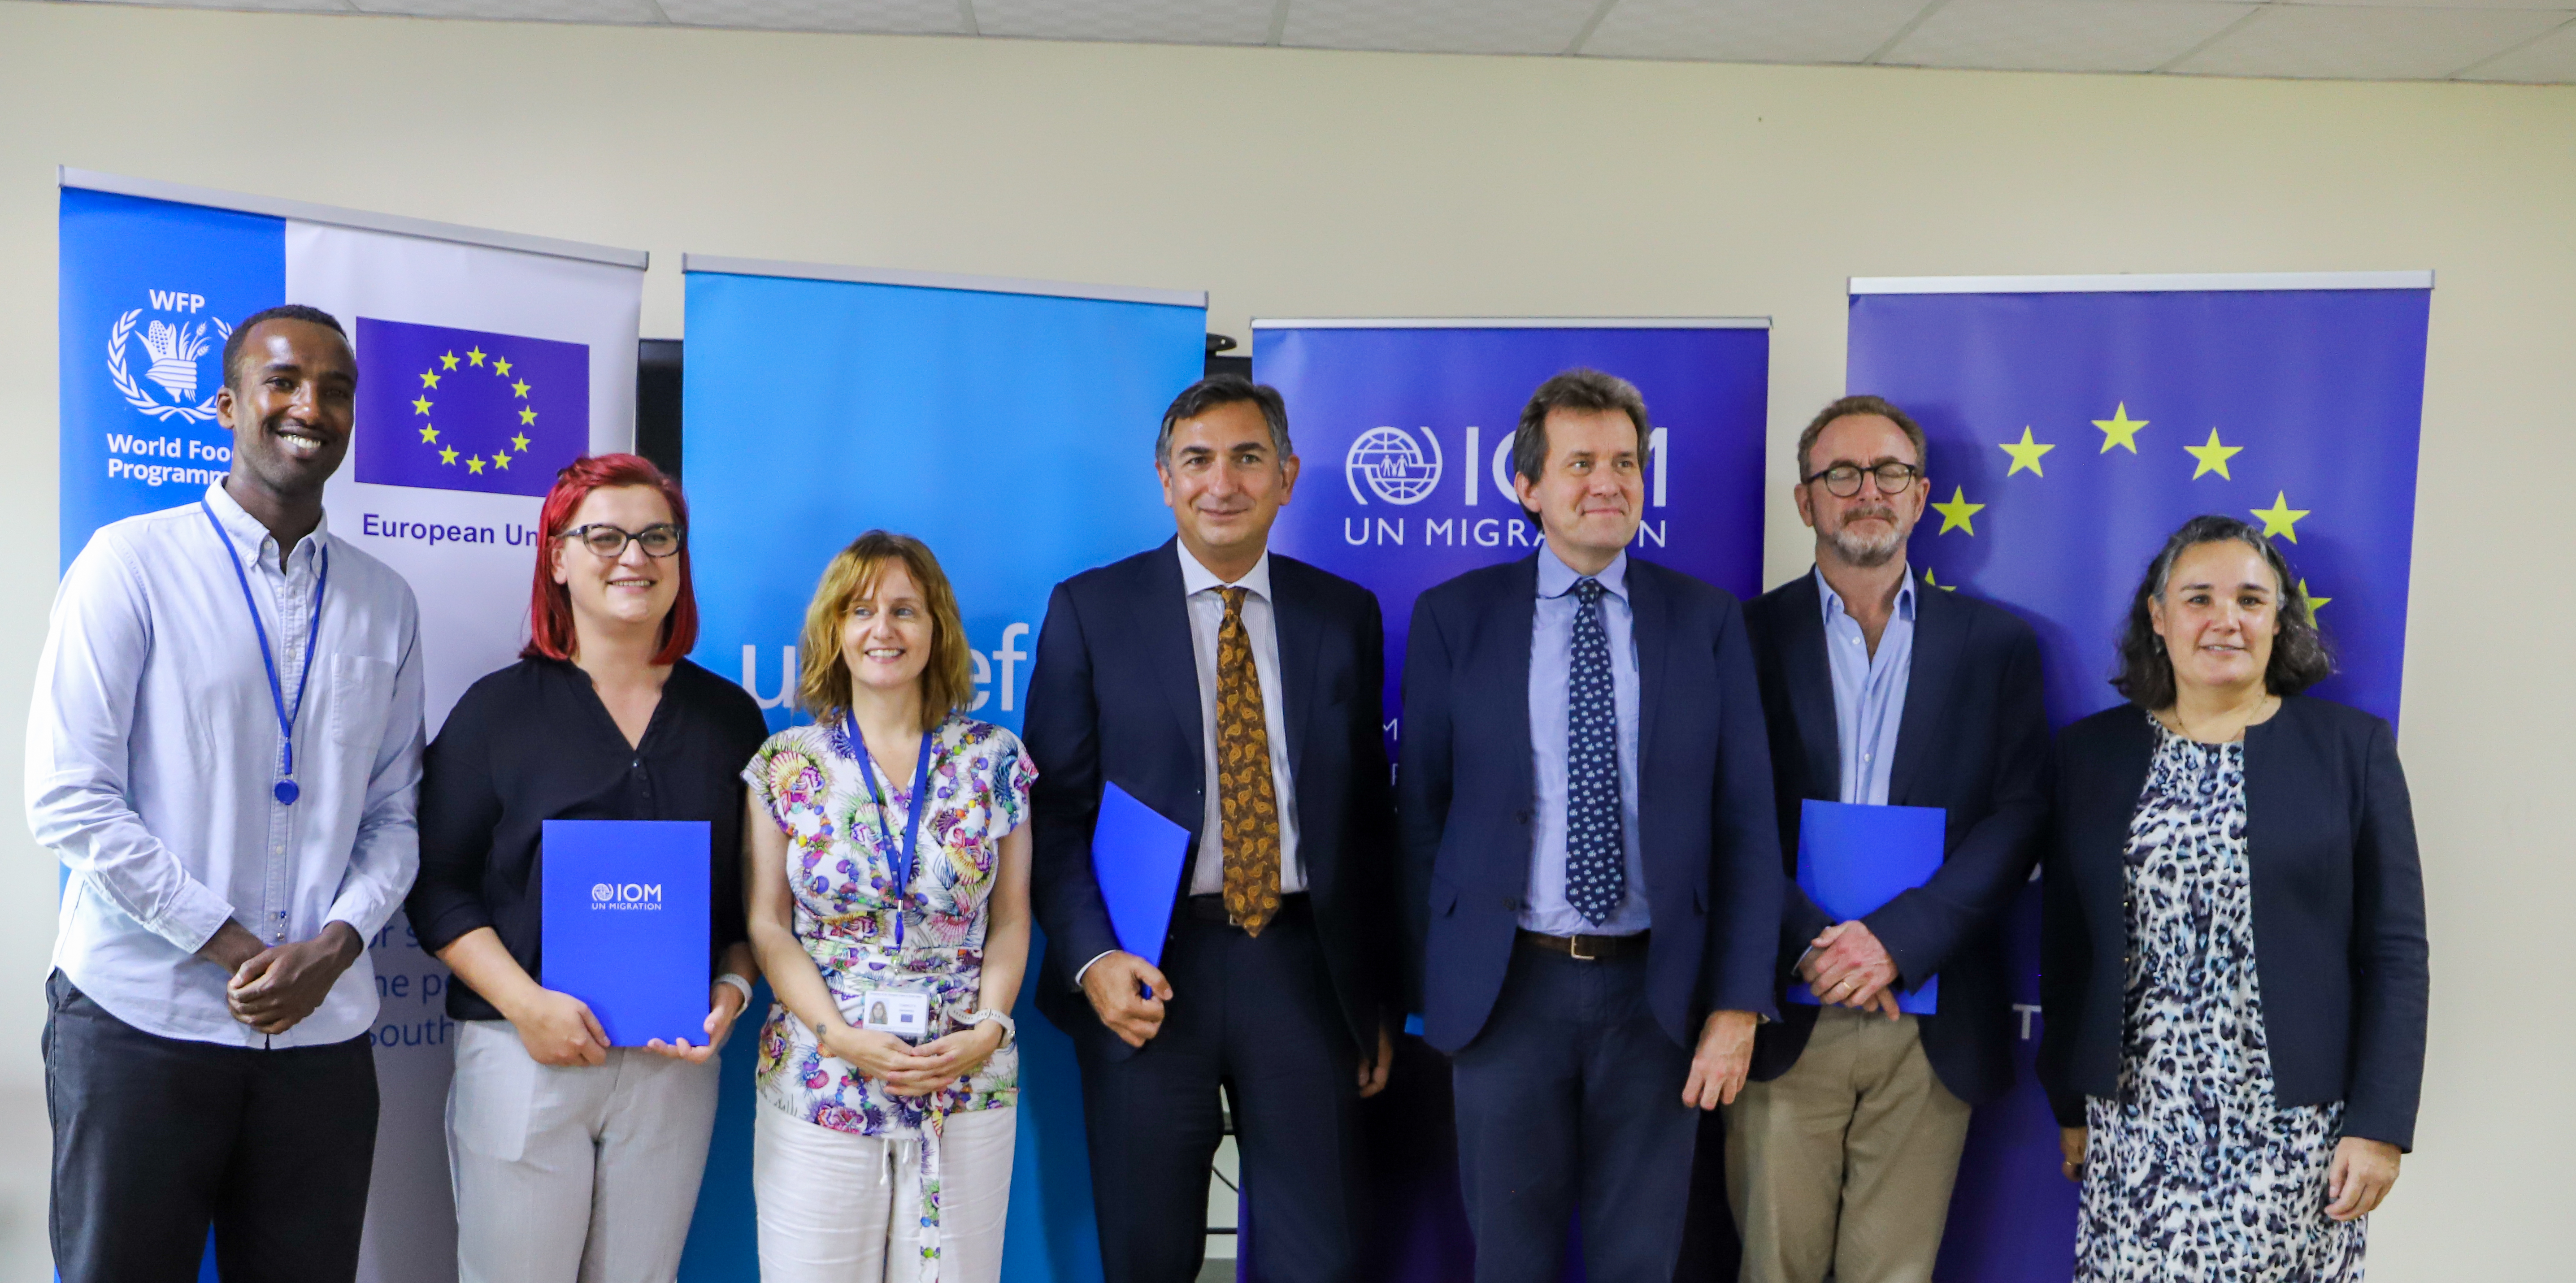 Group photo with the EU and representatives from IOM, UNICEF and WFP after the signing ceremony. Photo: Nabie Loyce